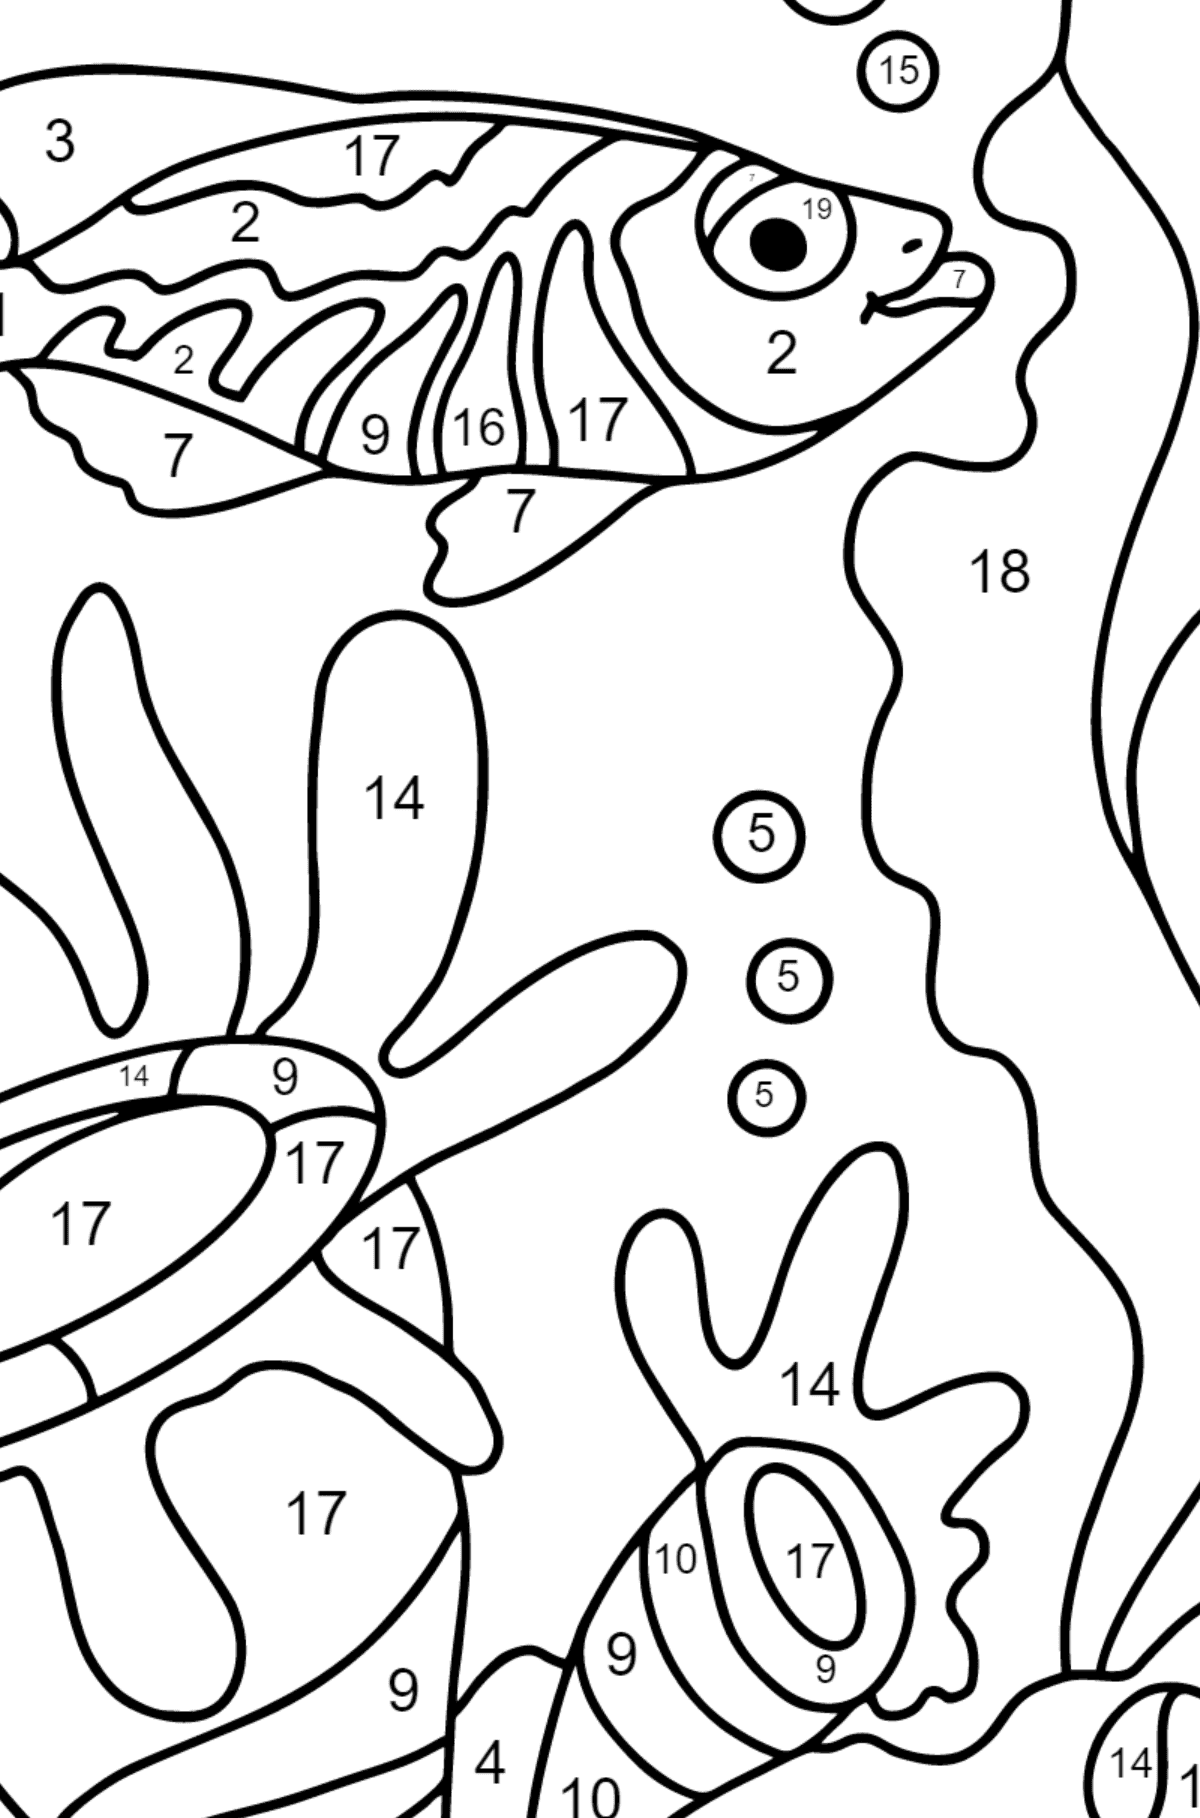 Coloring Page - A Fish is Swimming past the Corals - Coloring by Numbers for Children